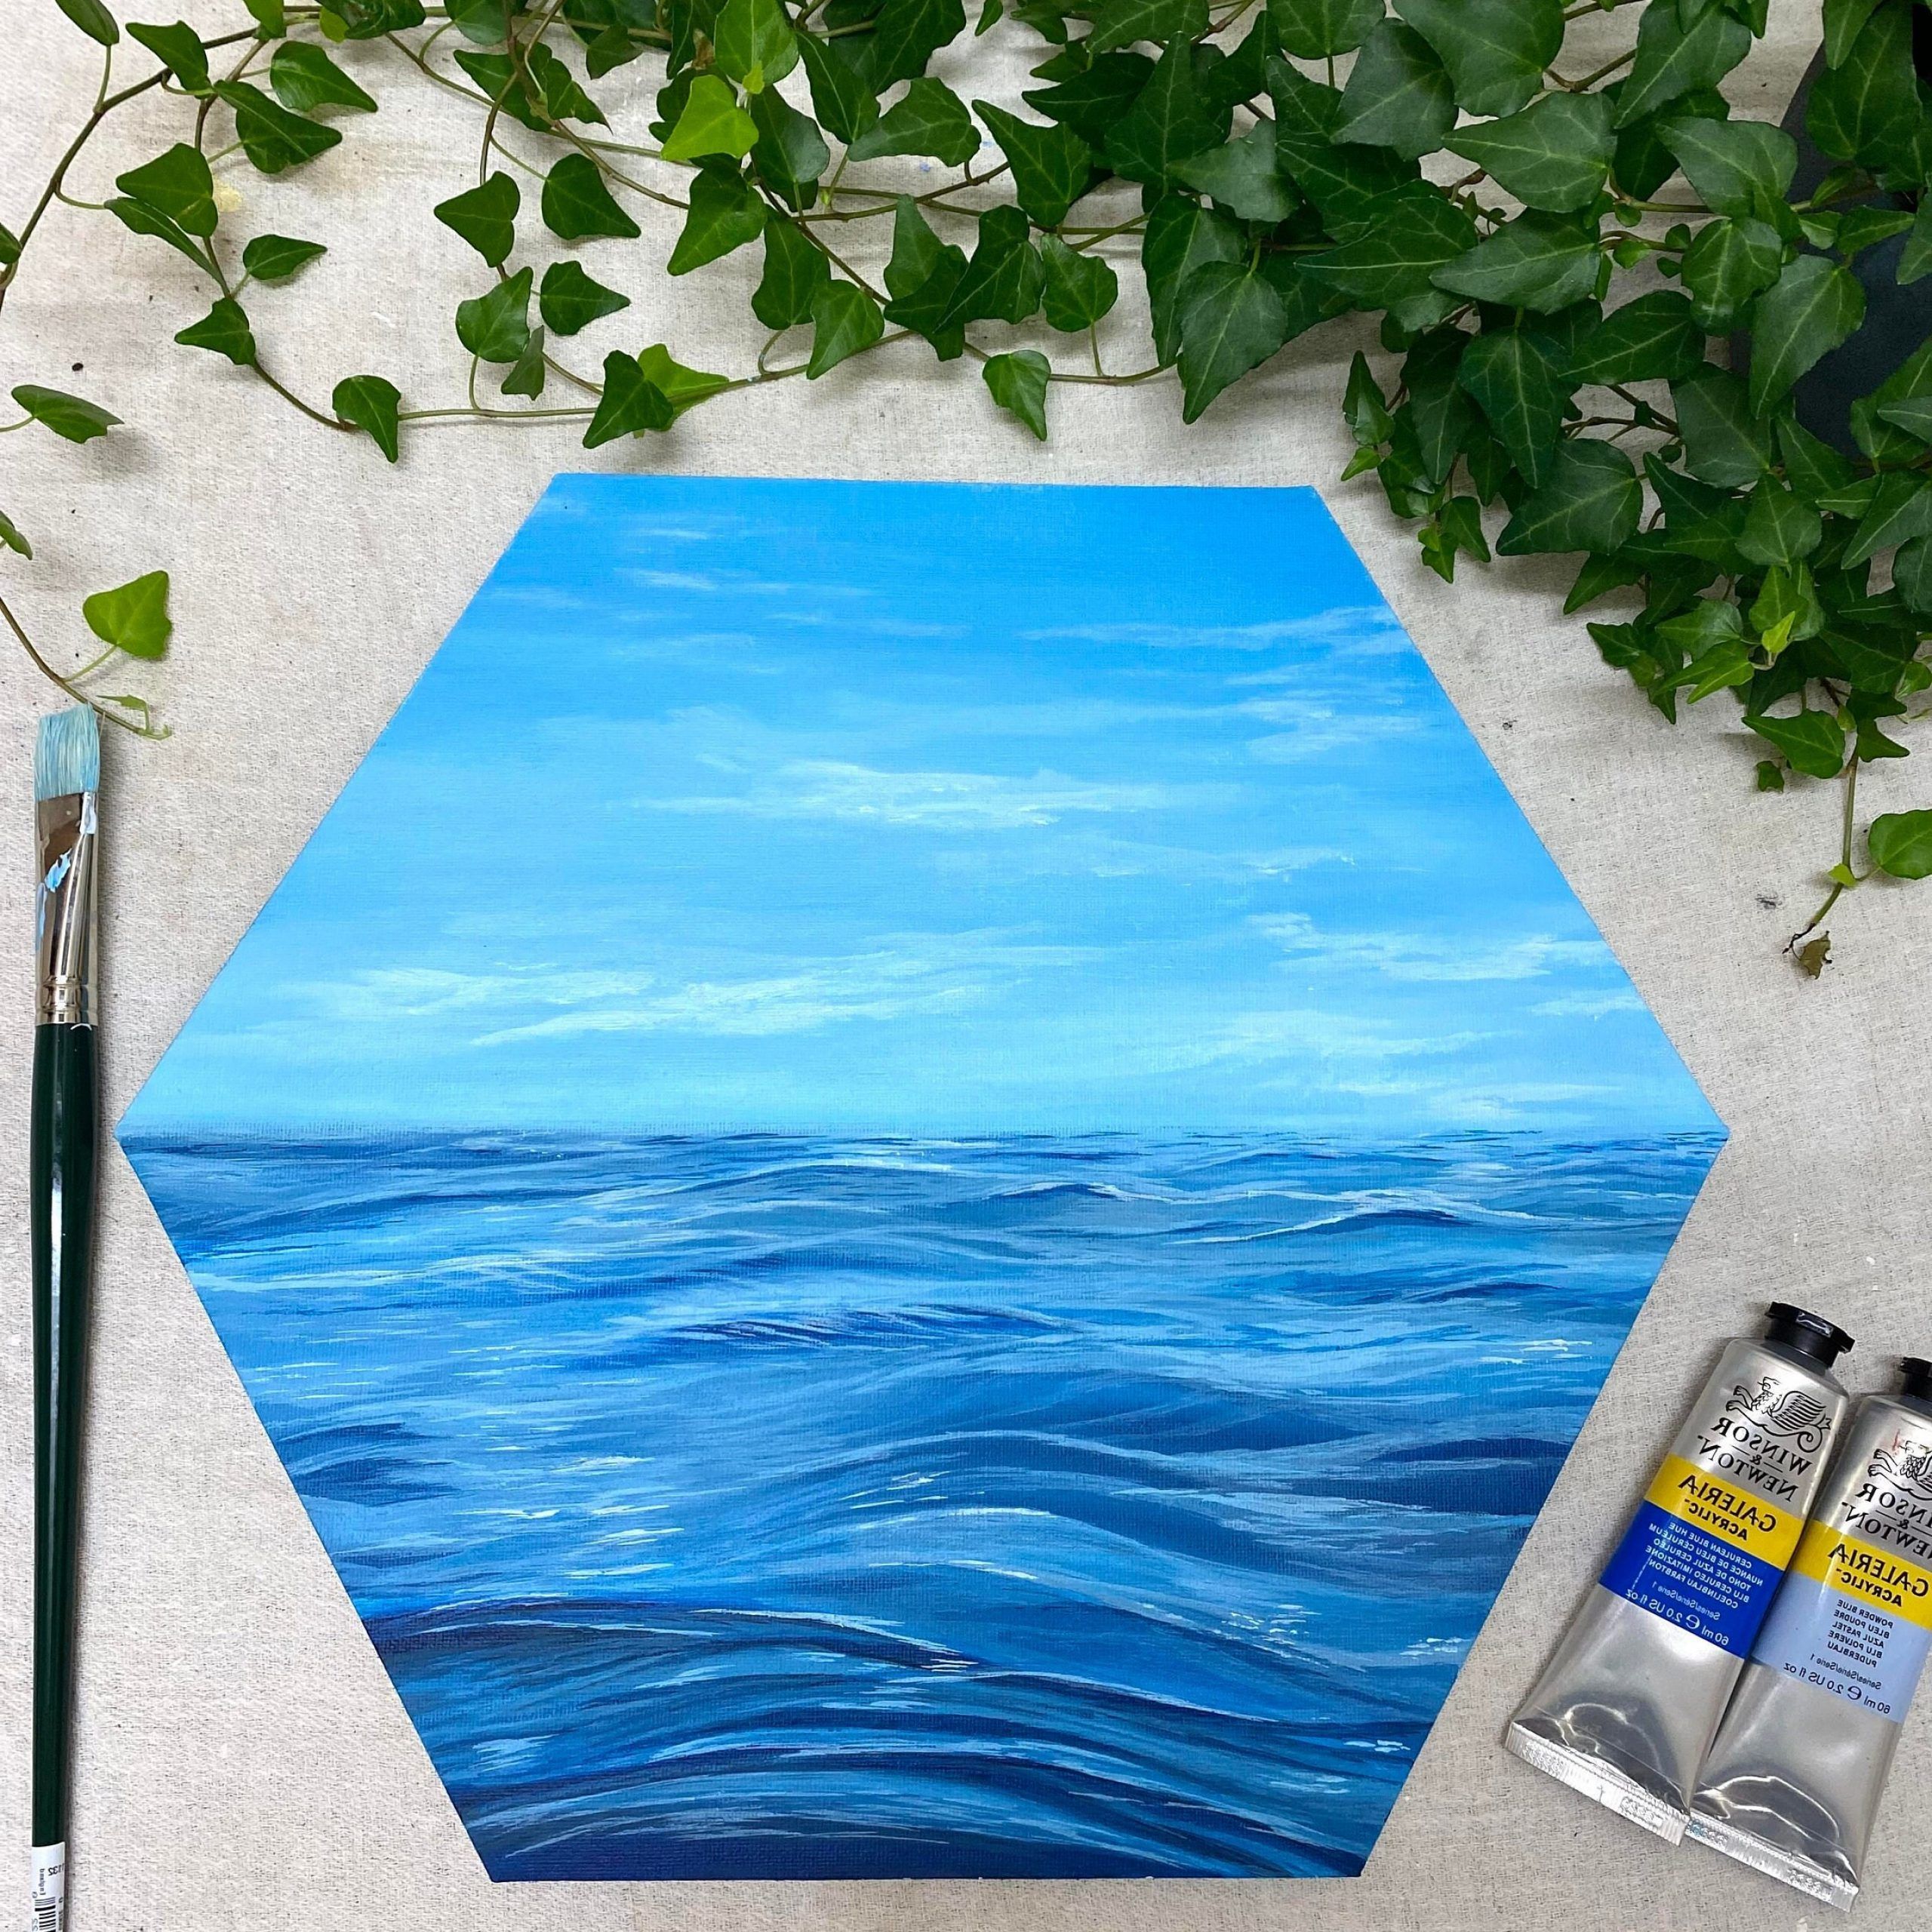 Most Recent Original Open Water Painting In Acrylic On Stretched Hexagon – Etsy Intended For Ocean Hue Wall Art (View 12 of 15)